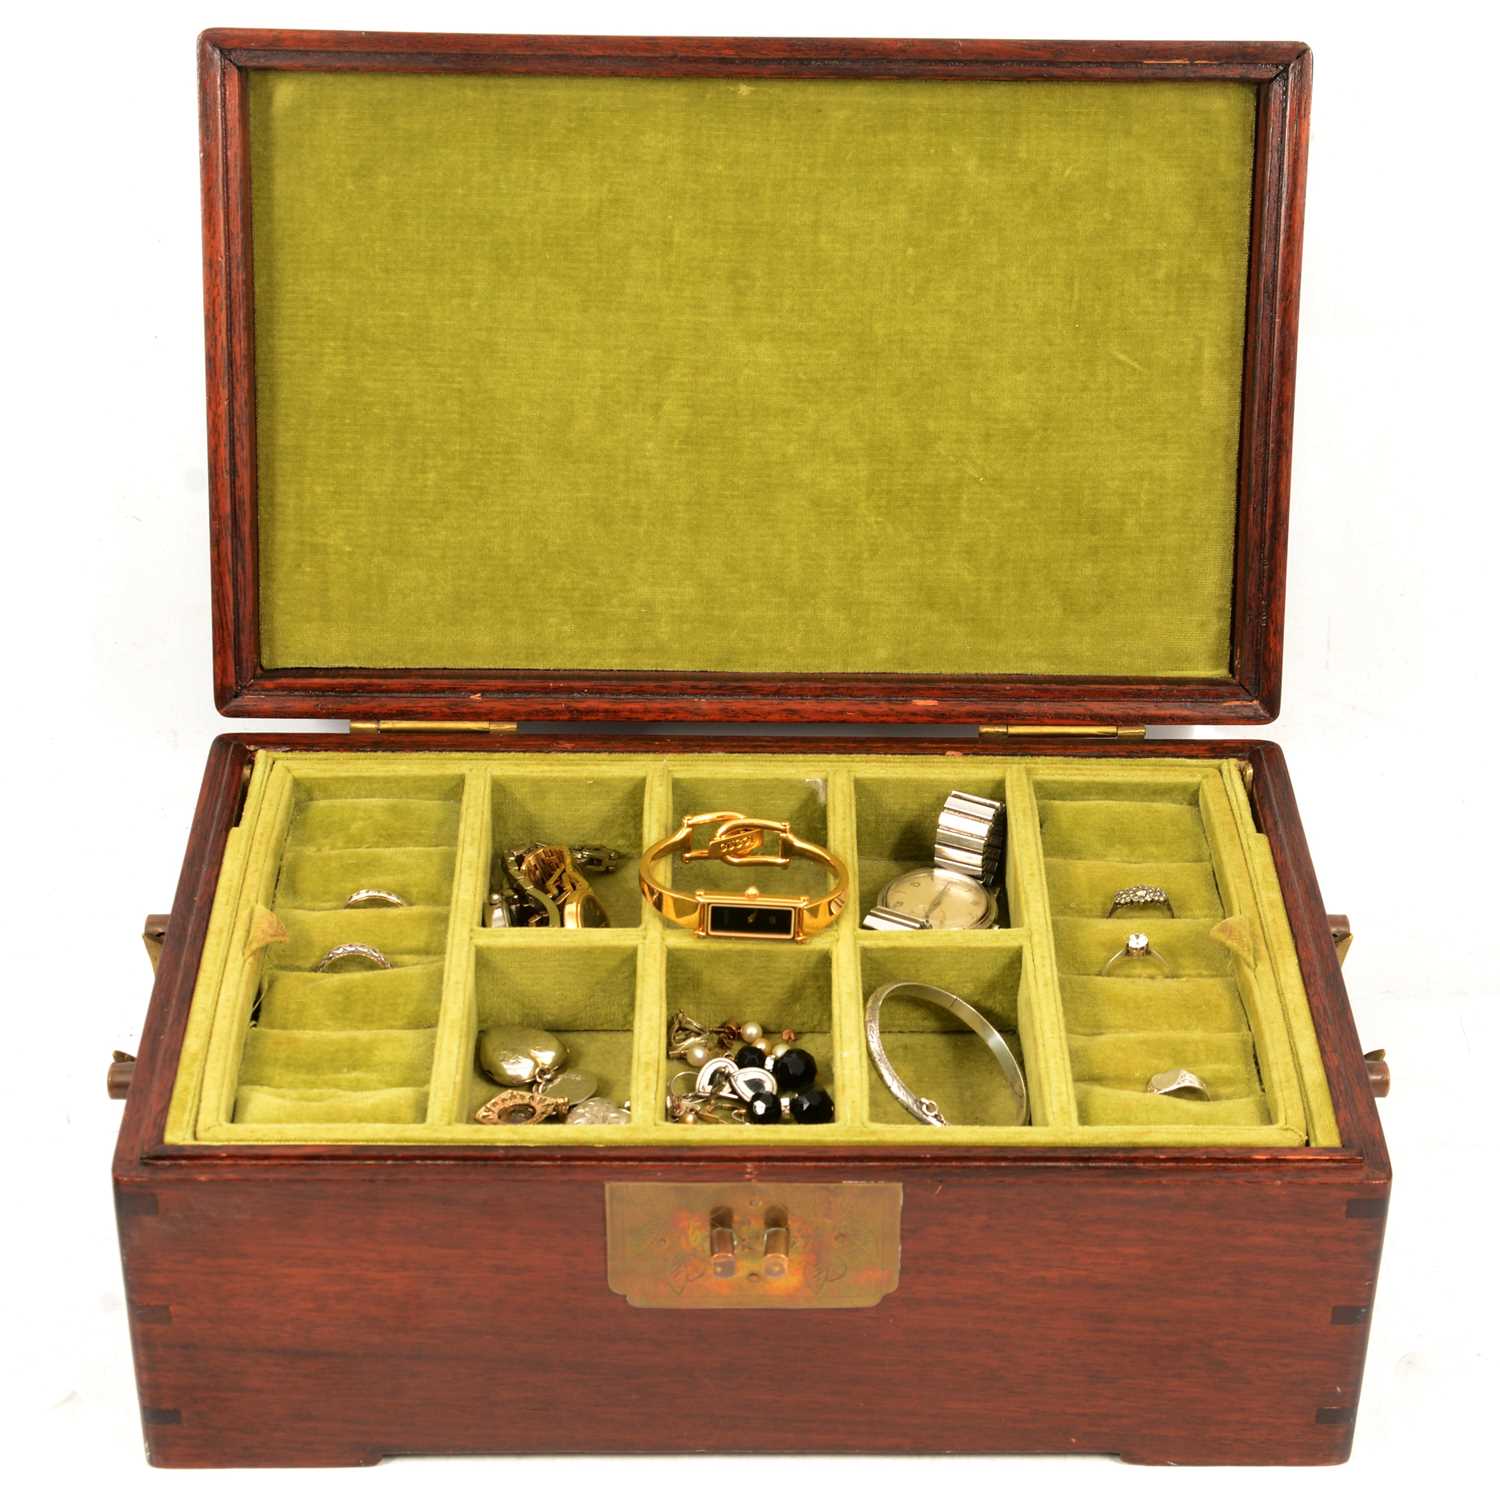 An Oriental jewel box with gold, silver and costume jewellery and wristwatches.